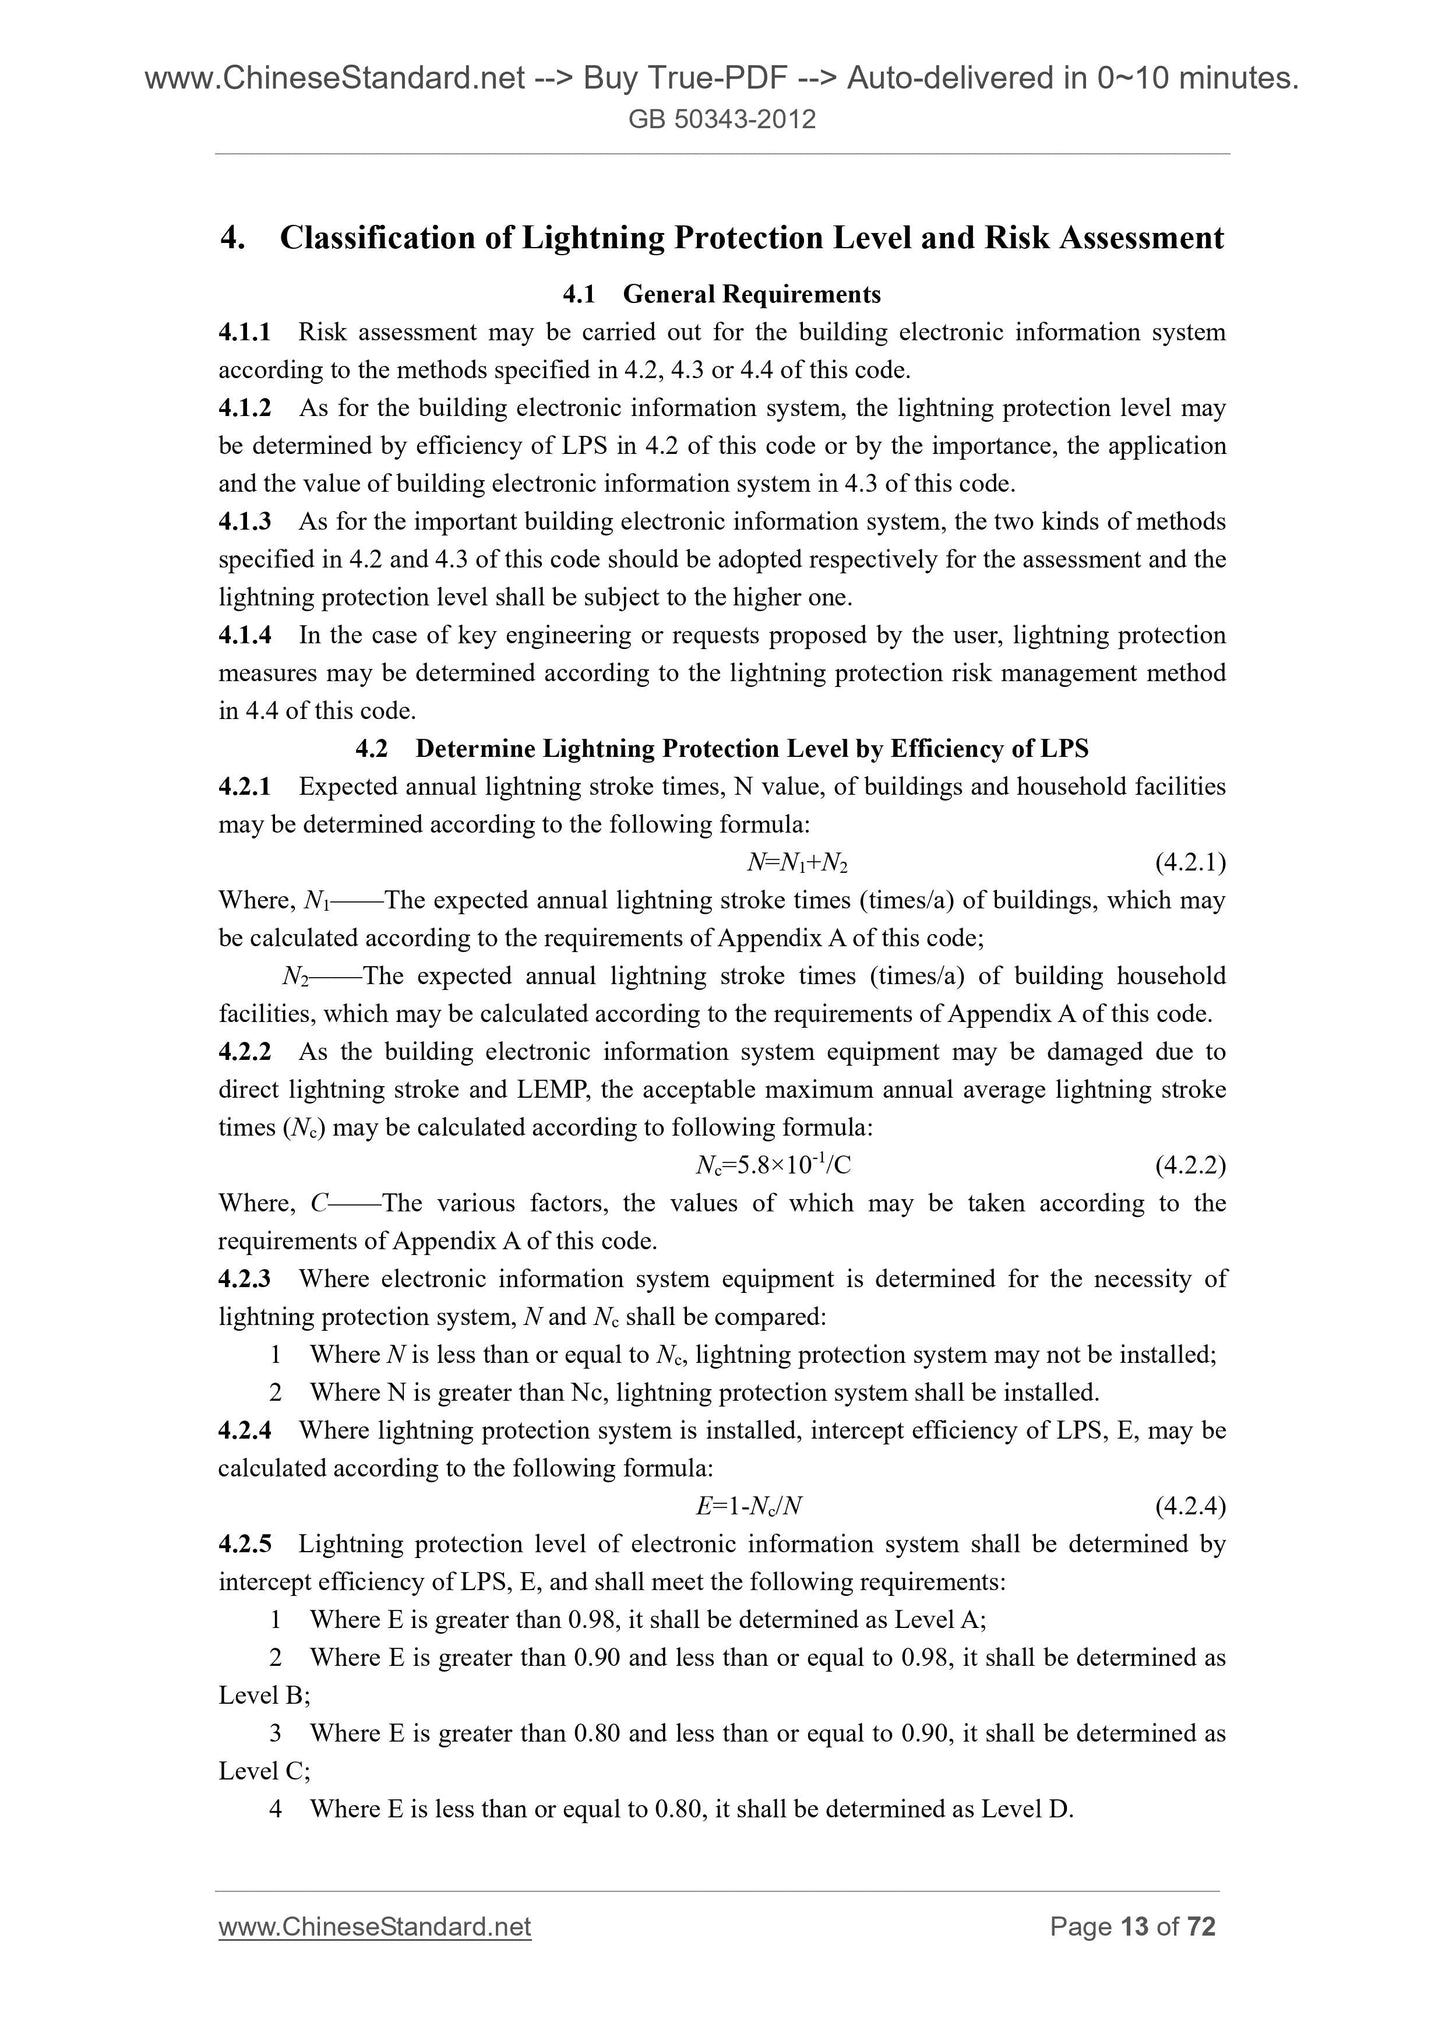 GB 50343-2012 Page 8